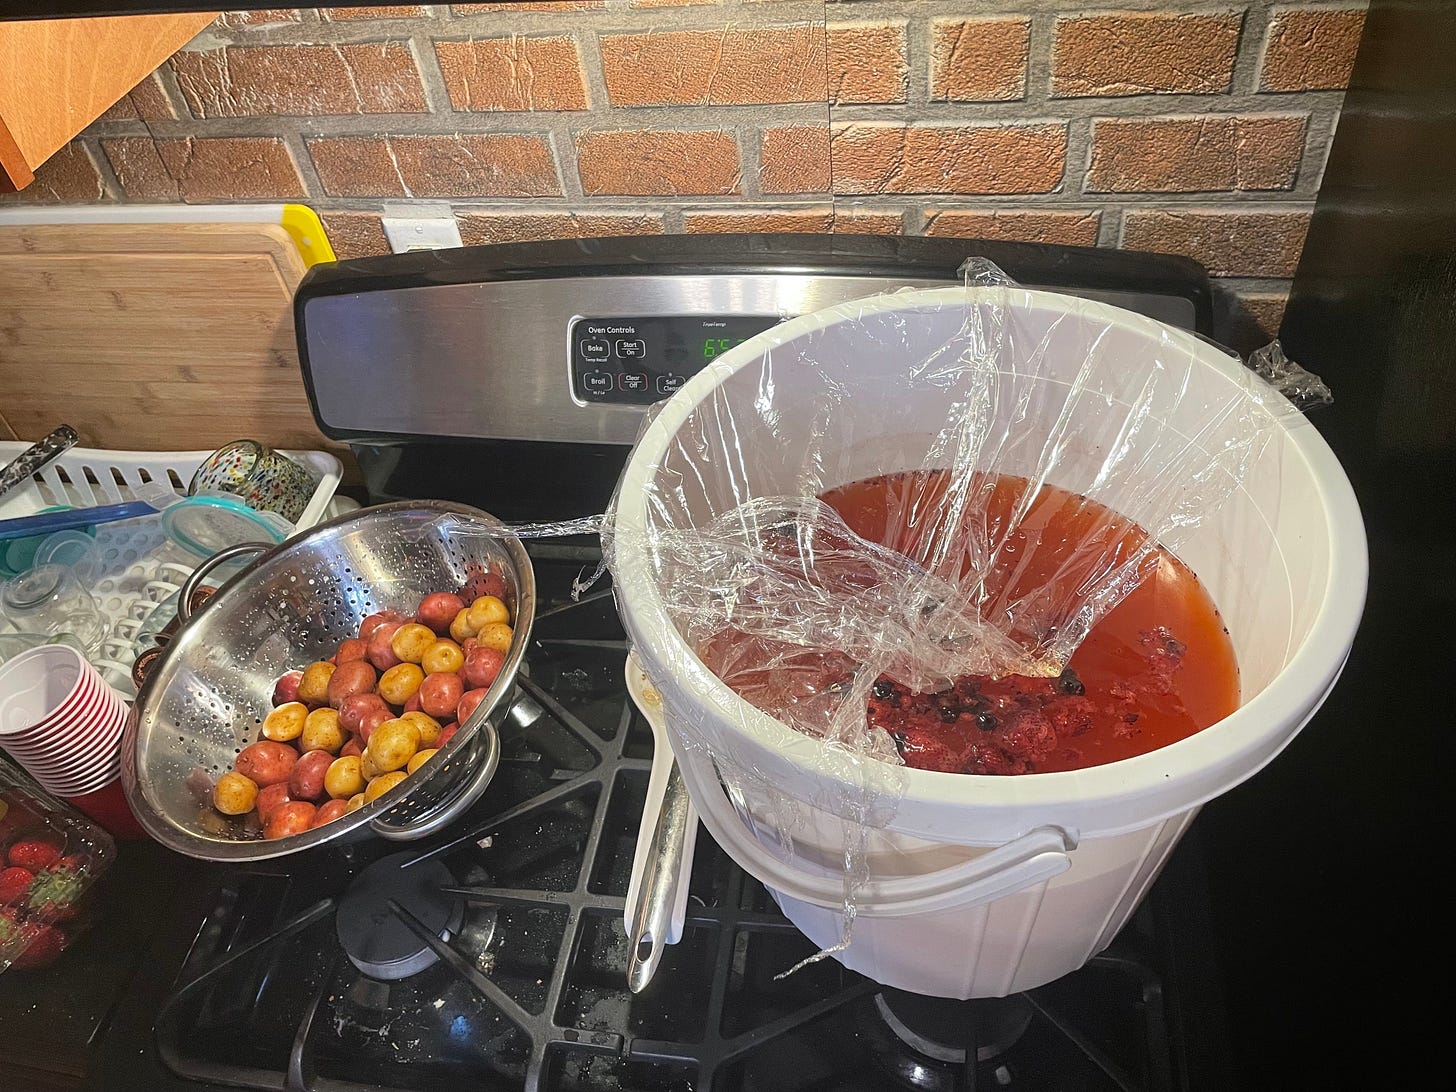 colander of potatoes on stove with large bucket of berry punch